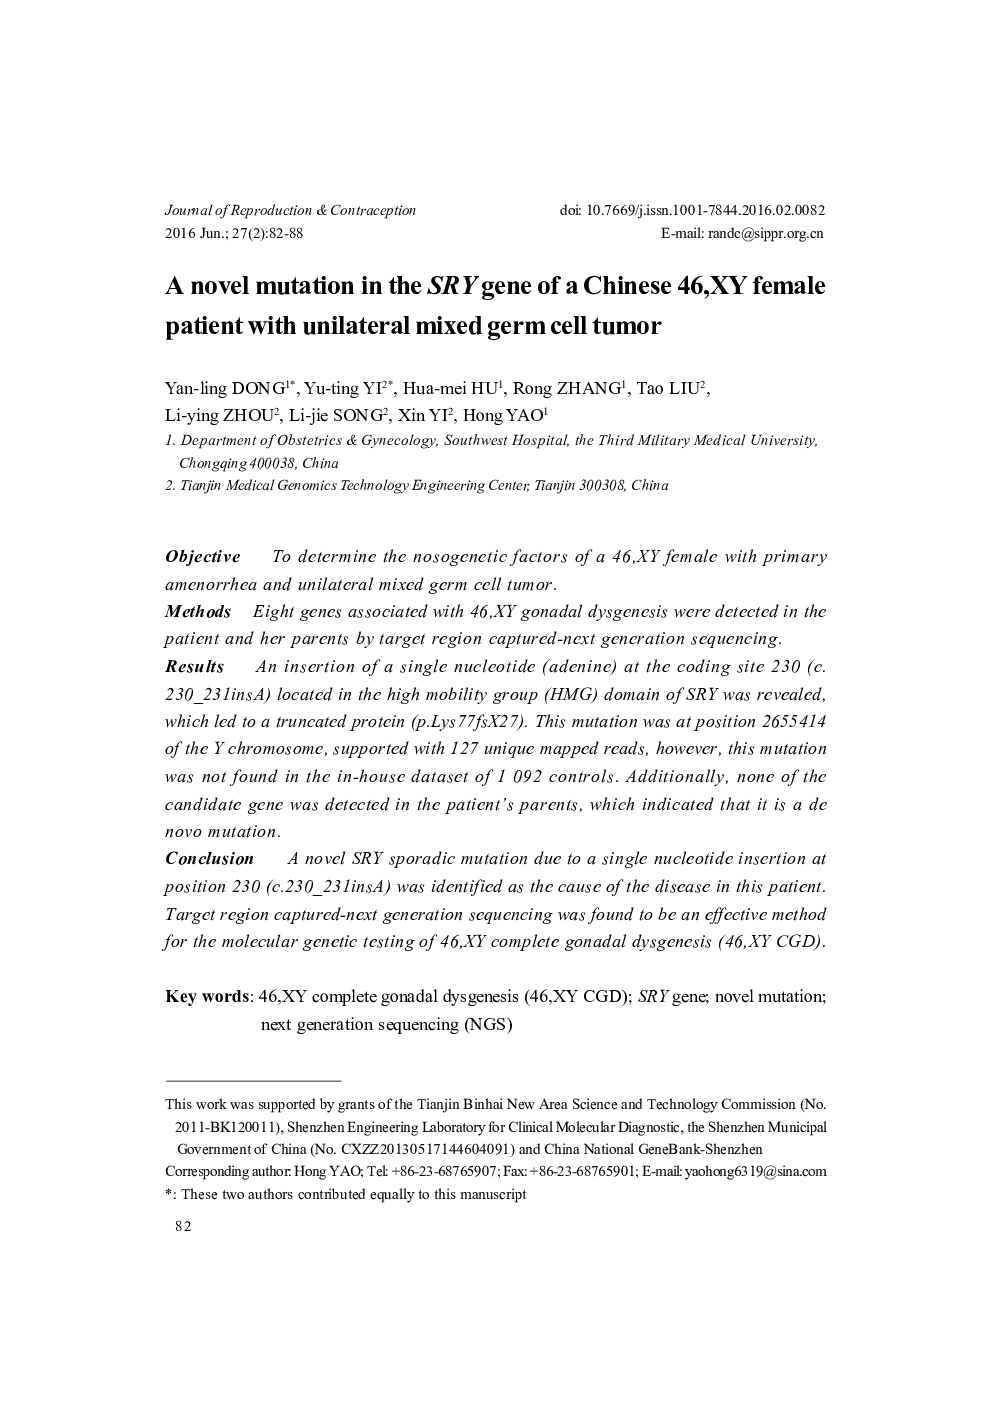 A novel mutation in the SRY gene of a Chinese 46, XY female patient with unilateral mixed germ cell tumor 